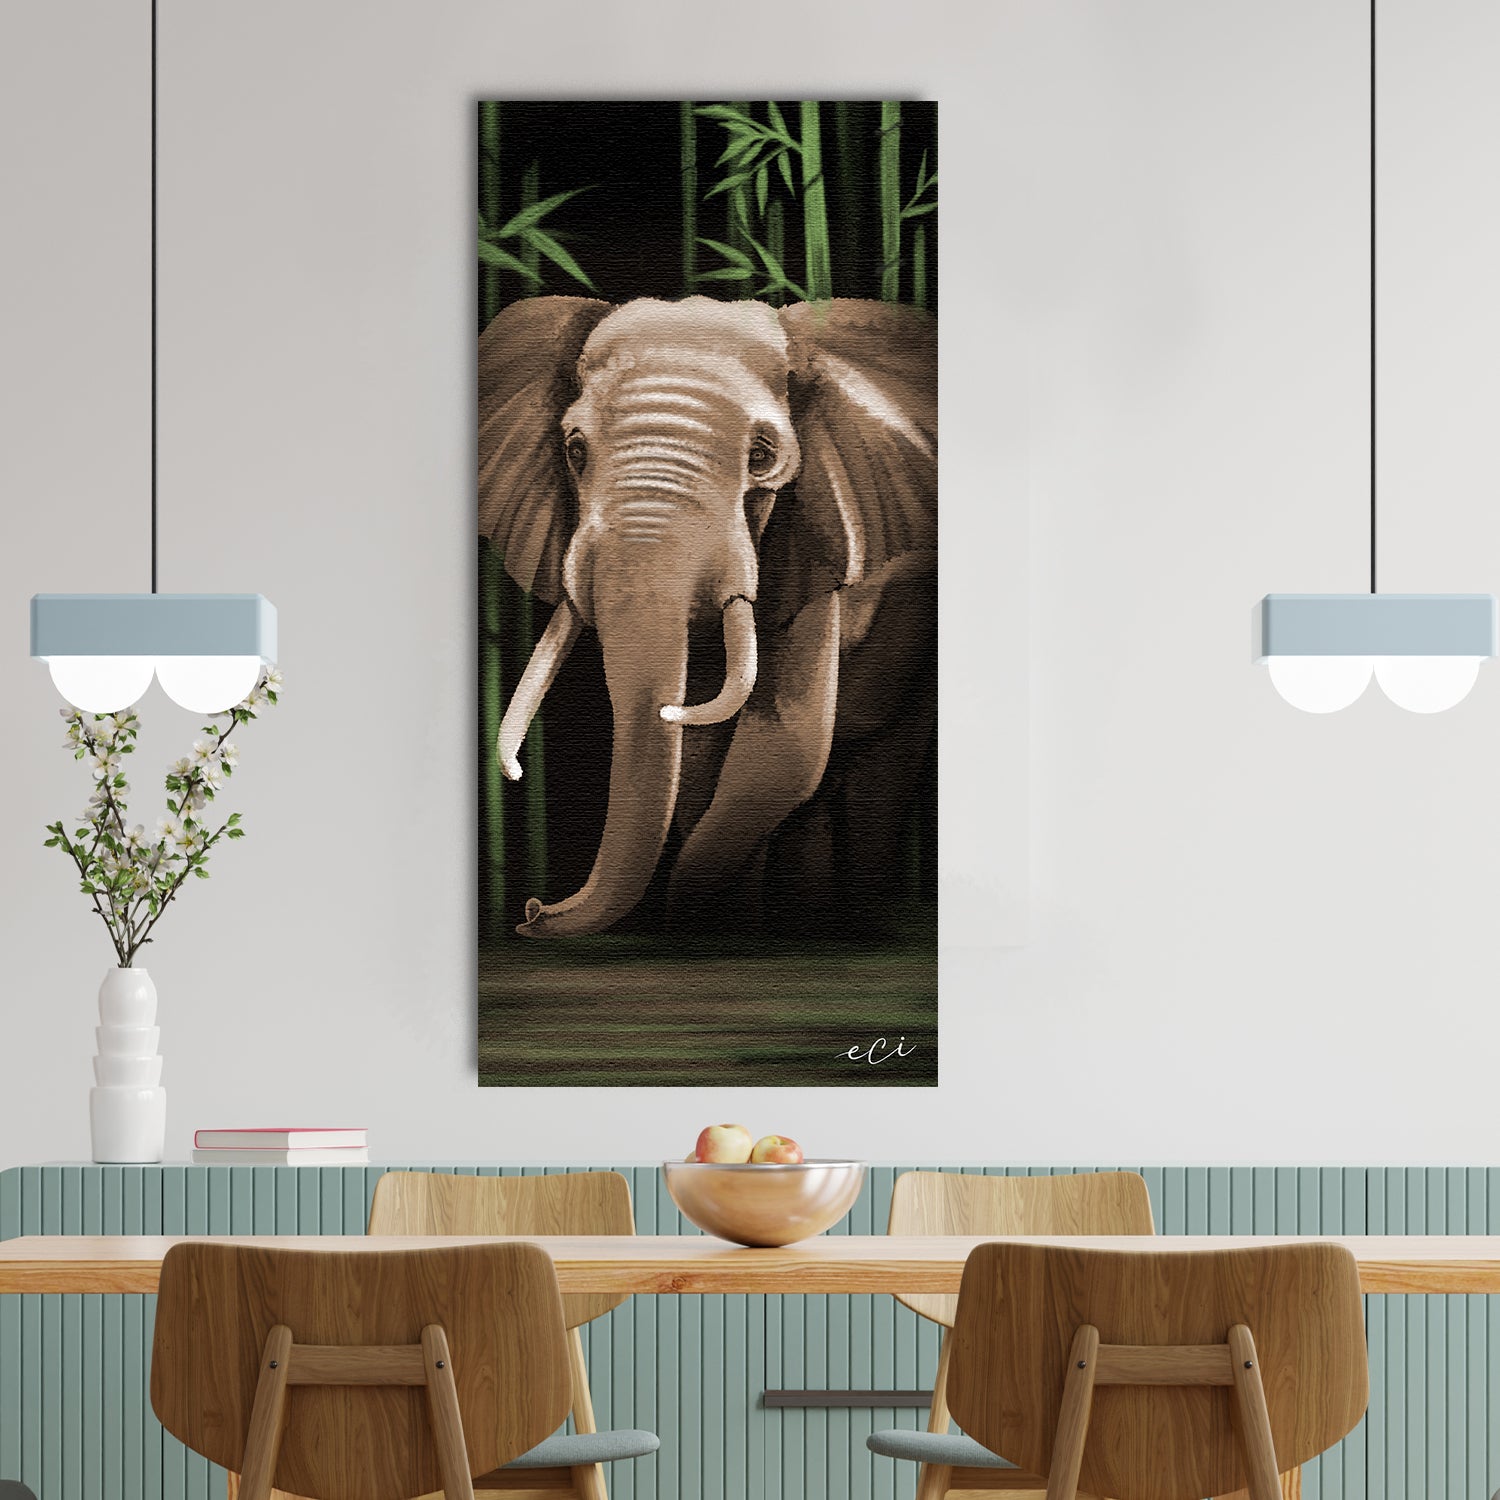 Elephant Walking In A Forest Canvas Painting Digital Printed Animal Wall Art 2